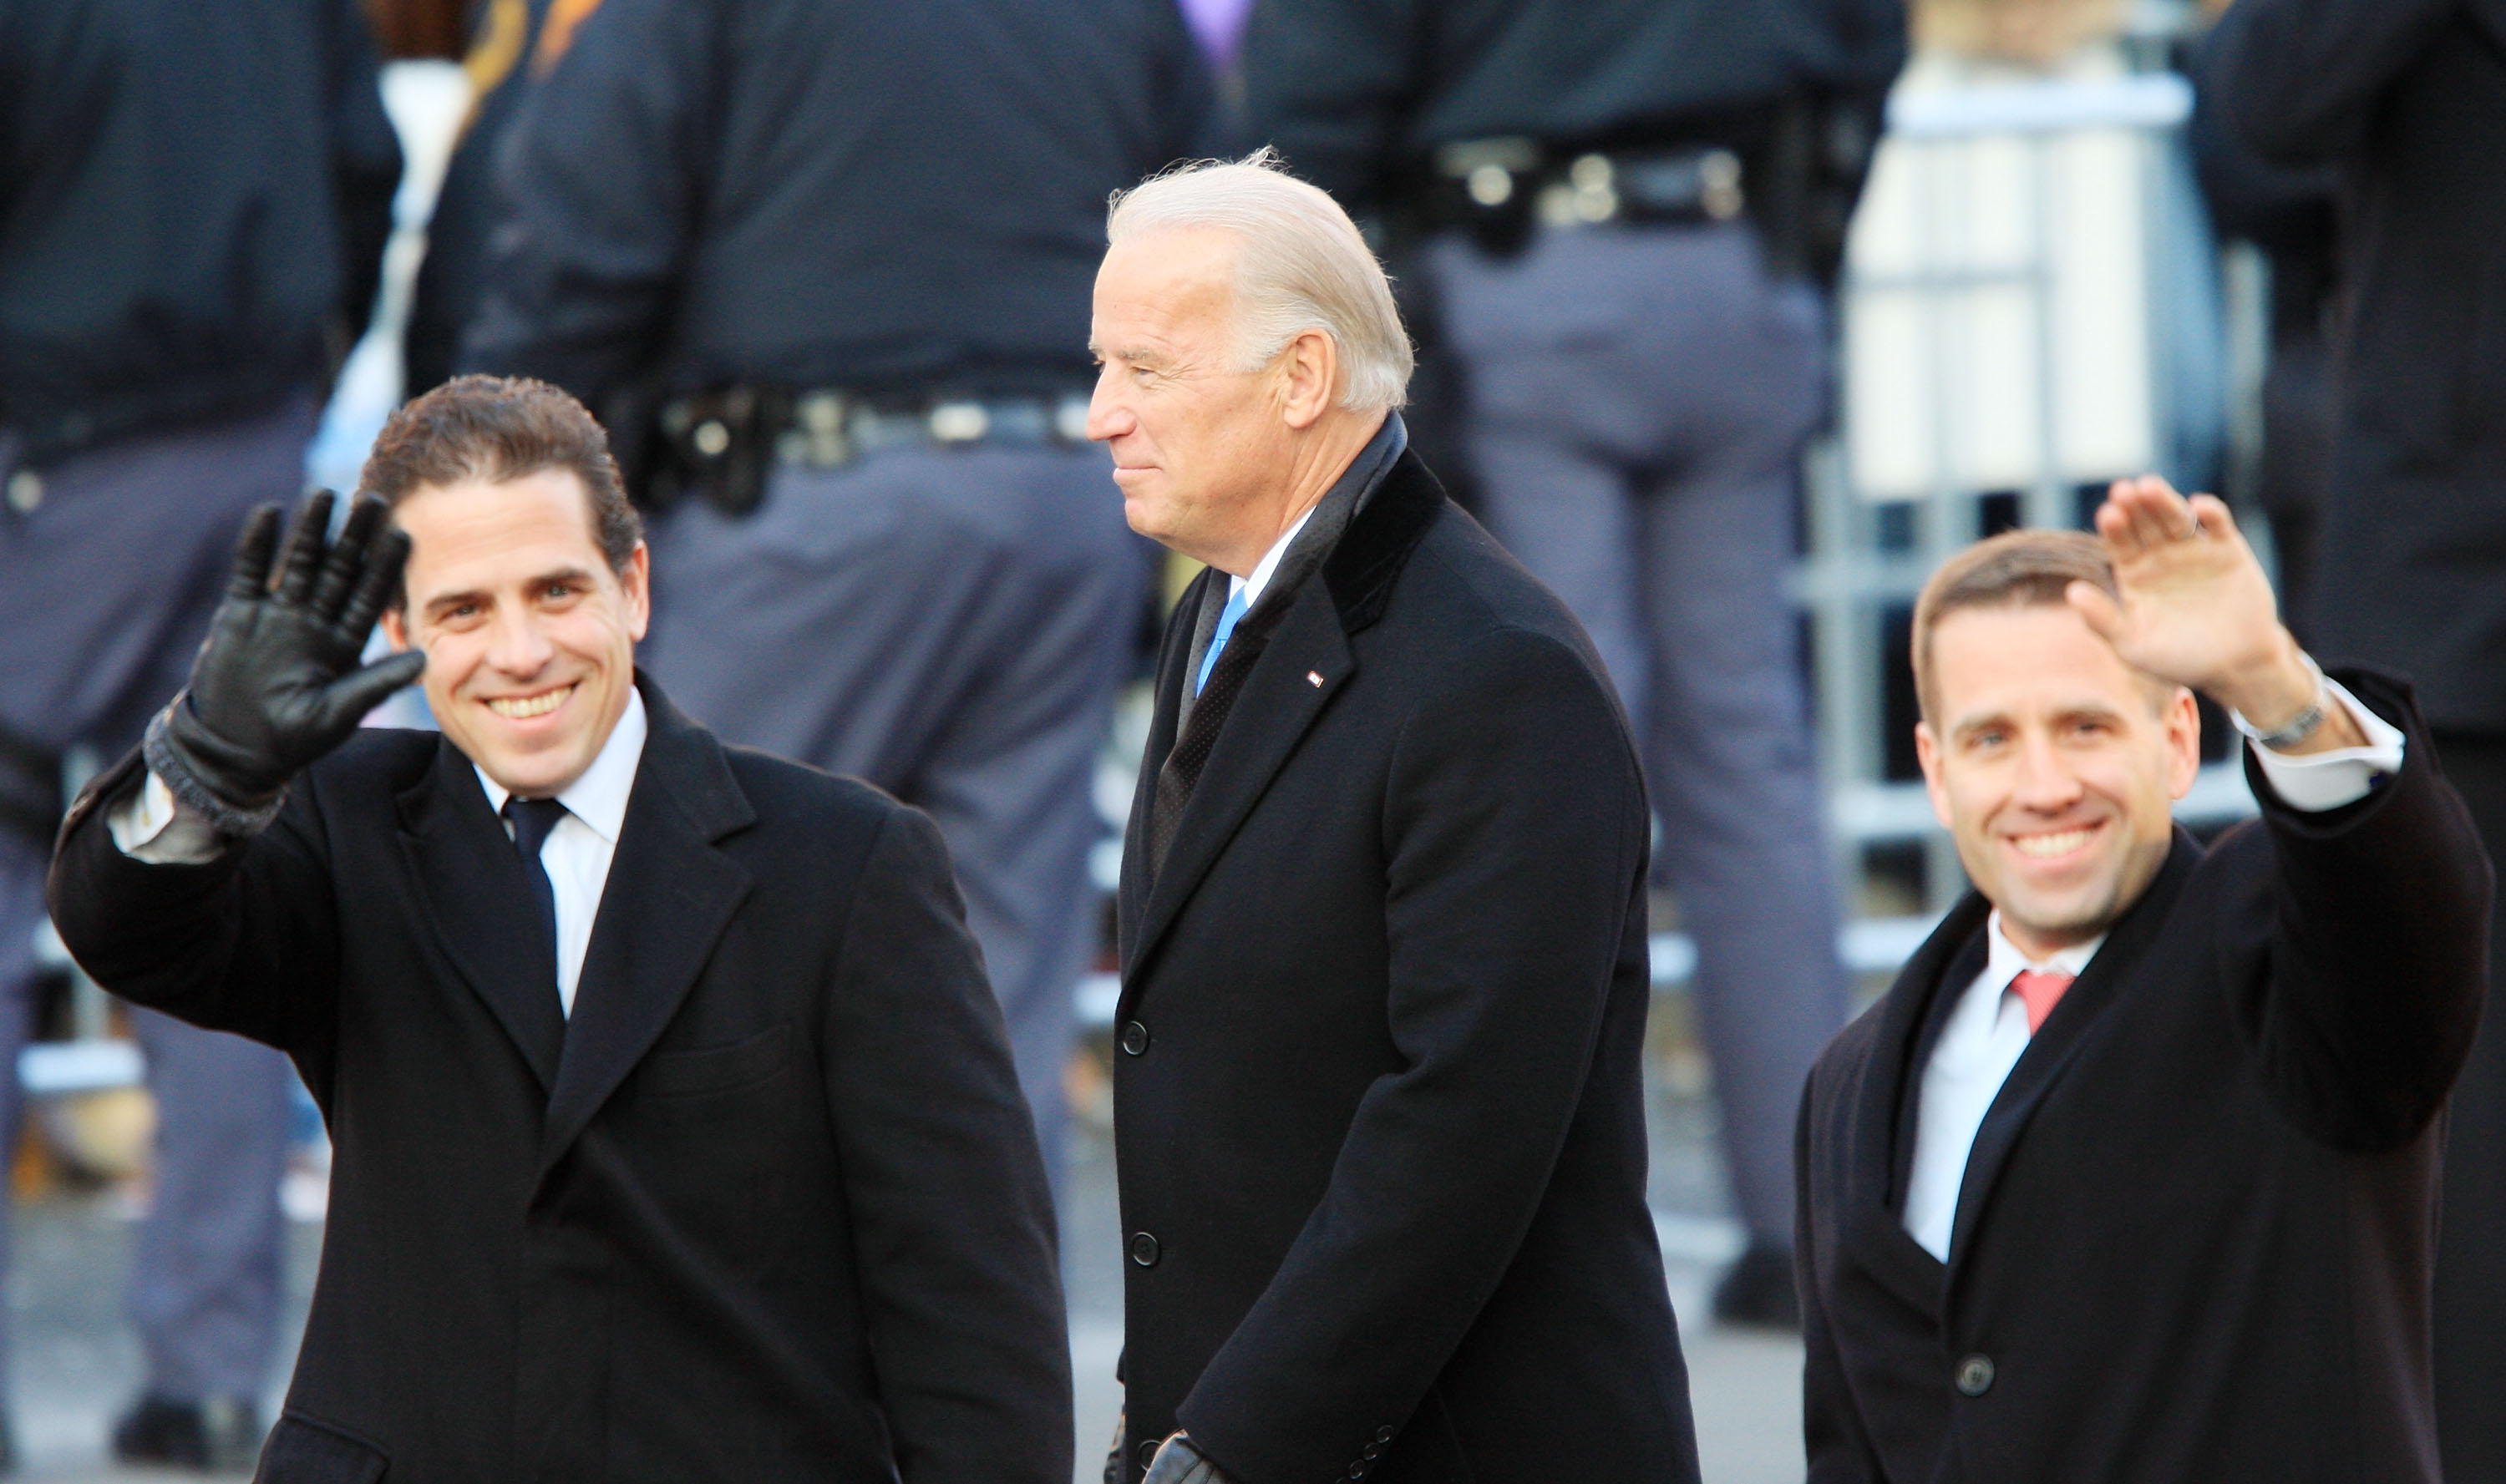 Fact check: False claim that Biden family owns 10% of Chinese company